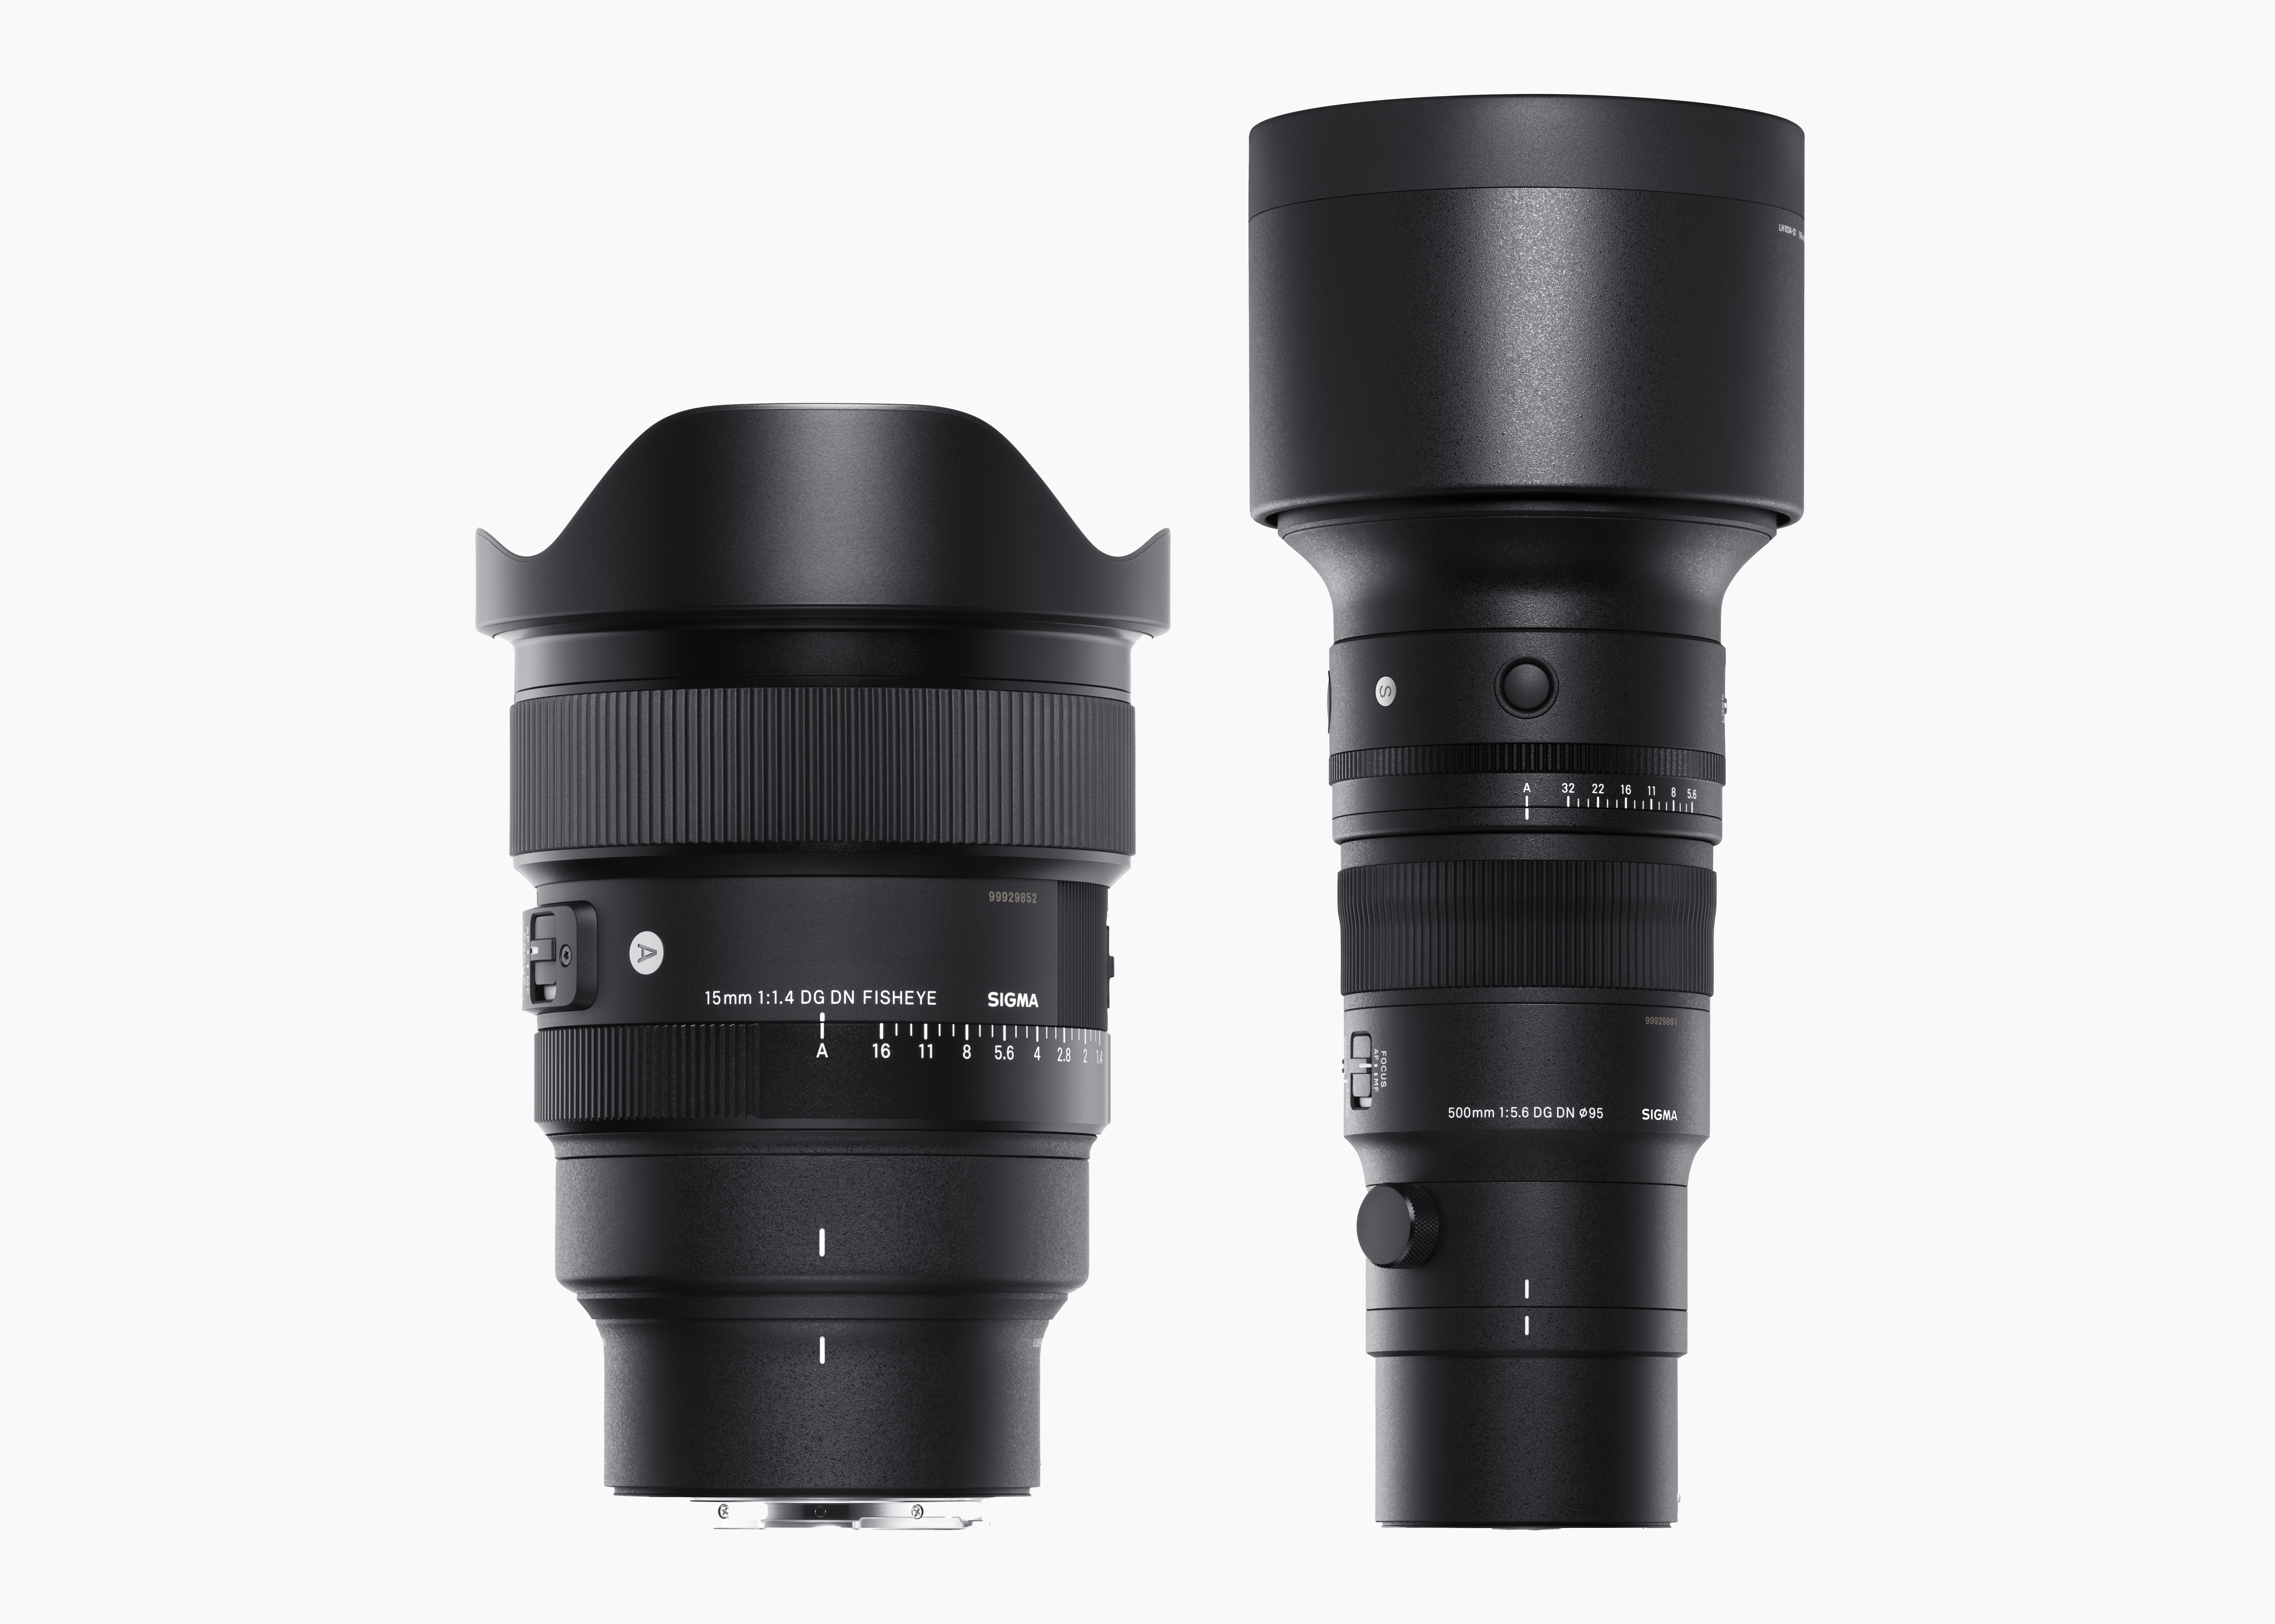 NEW SIGMA 15mm F1.4 DG DN and SIGMA 500mm F5.6 7